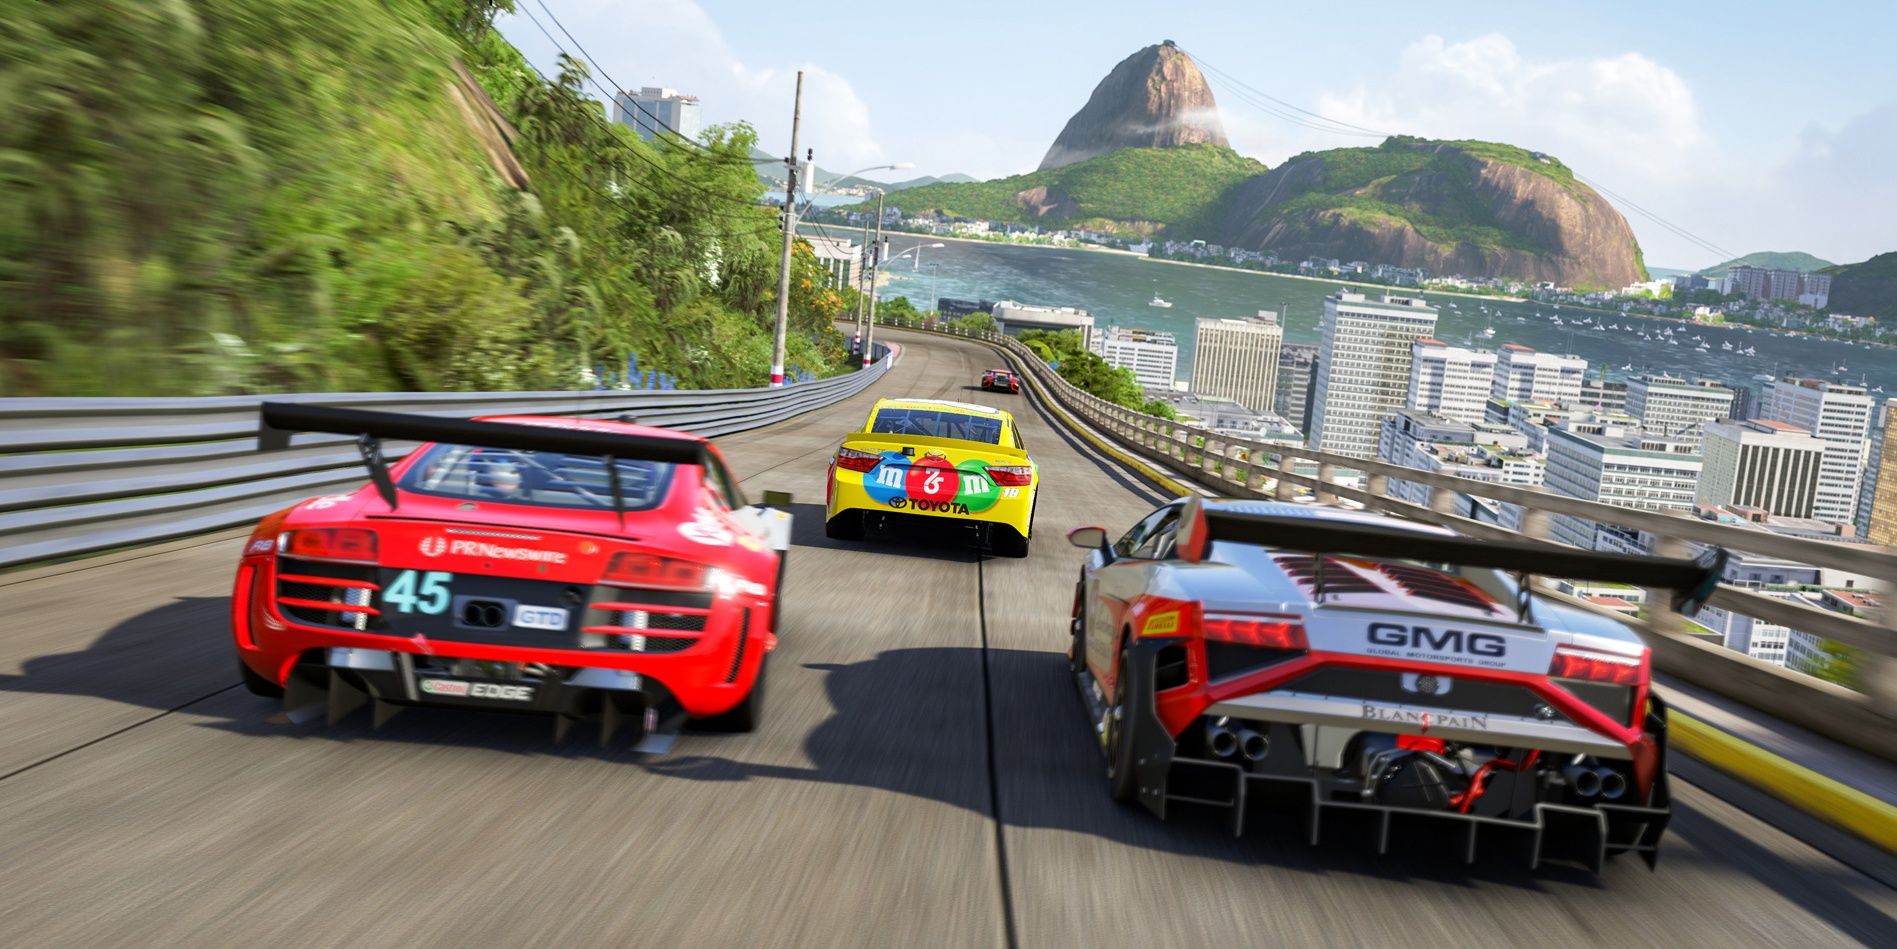 The 10 Best Racing Games You Can Play On The Xbox One According To